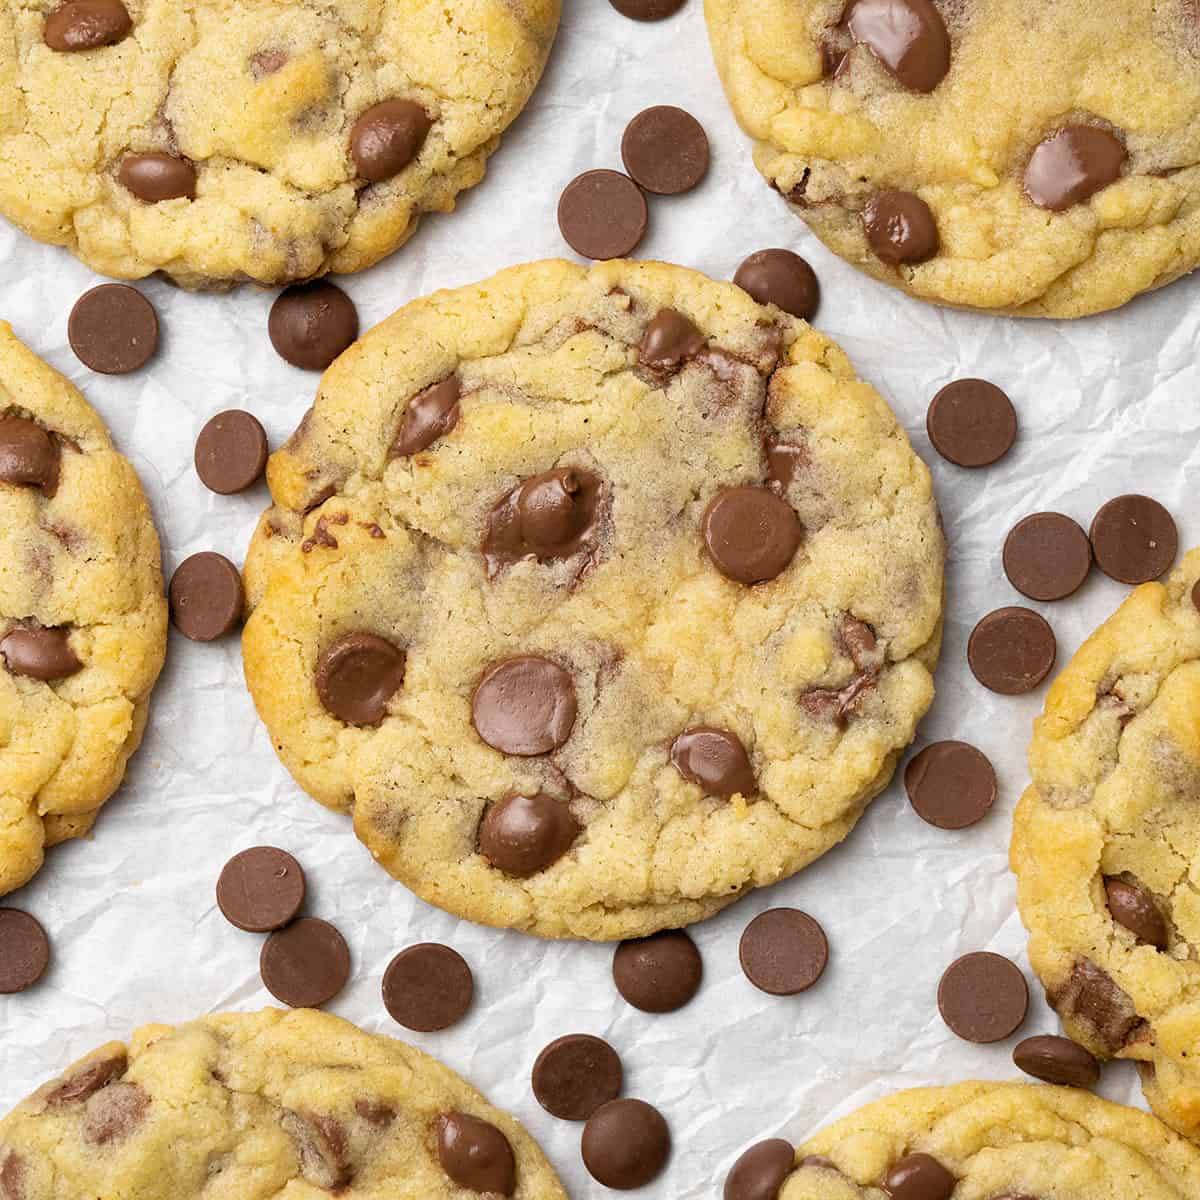 25 Exciting Homemade Cookie Recipes You Need to Try